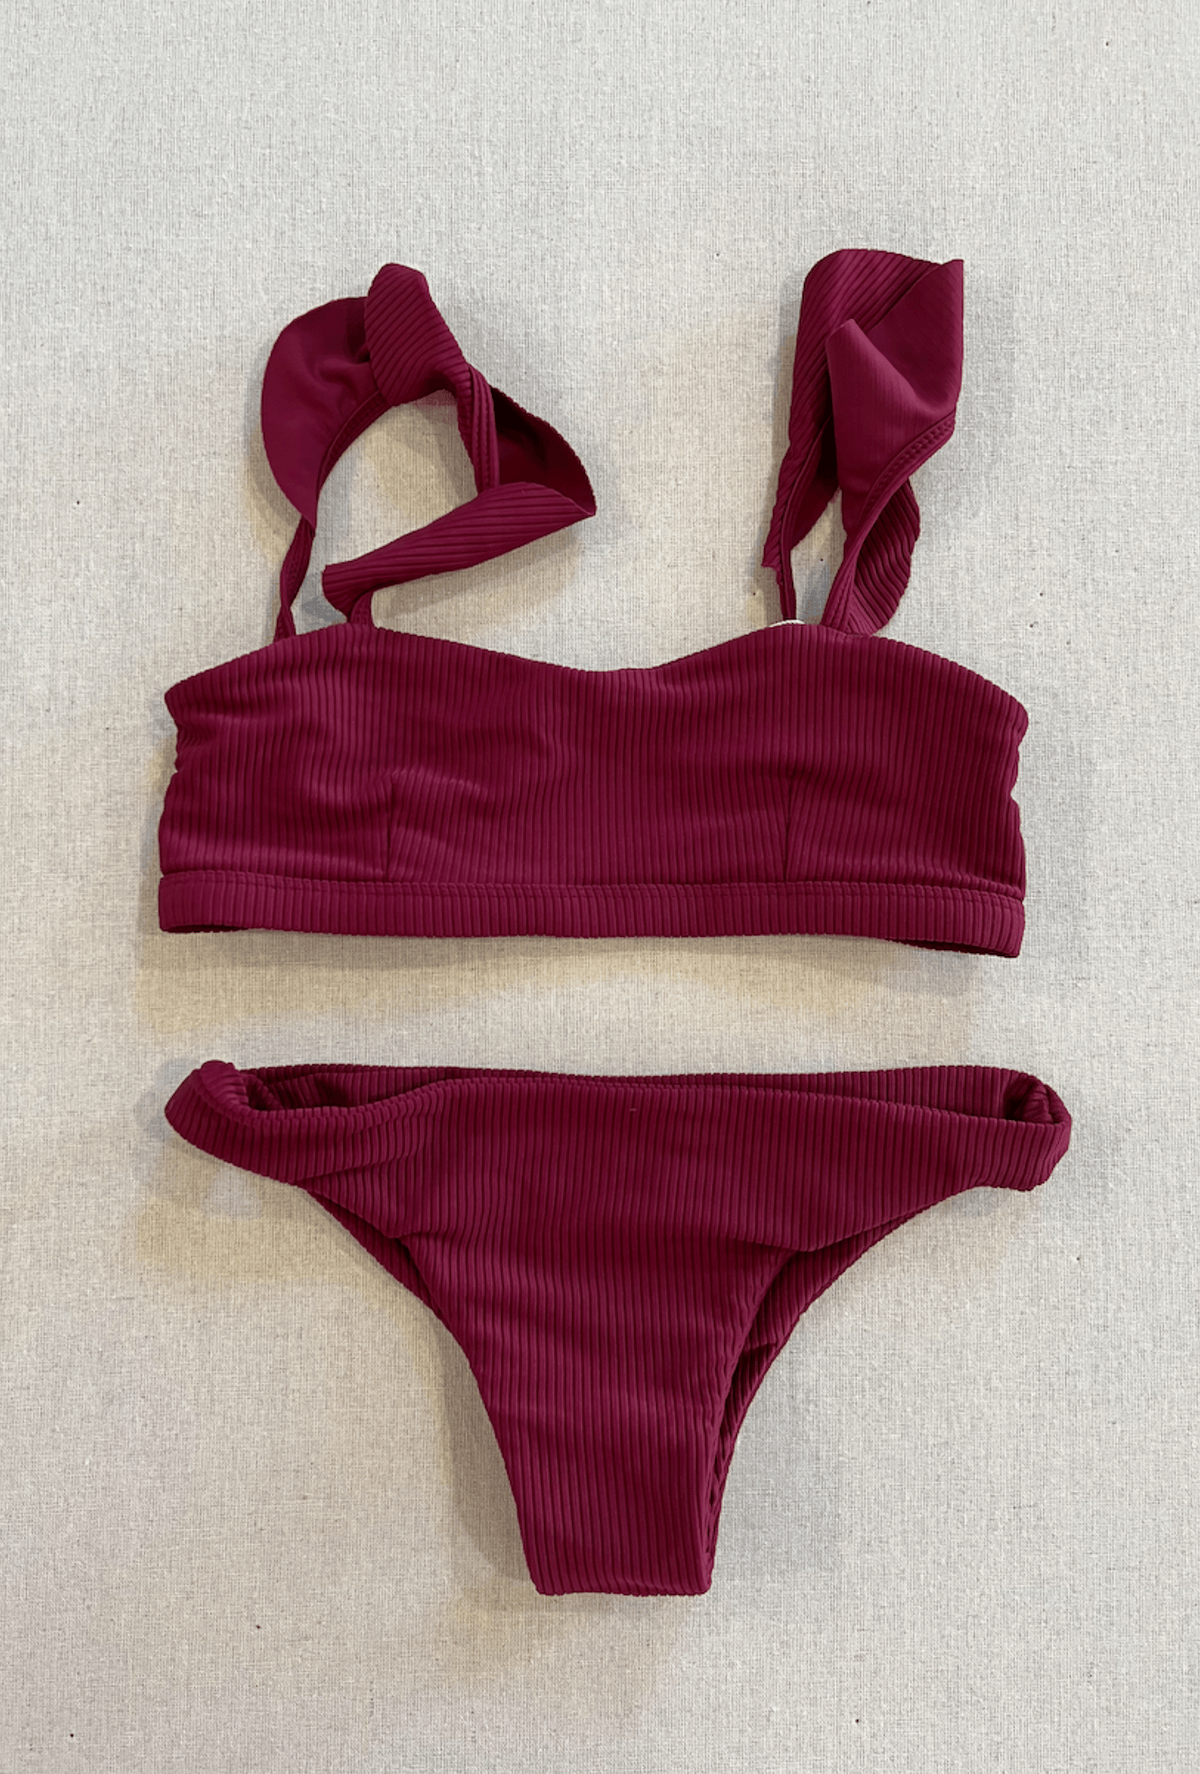 SOPHIE TOP/ BLOHM BOTTOM IN MULBERRY (SAMPLE)